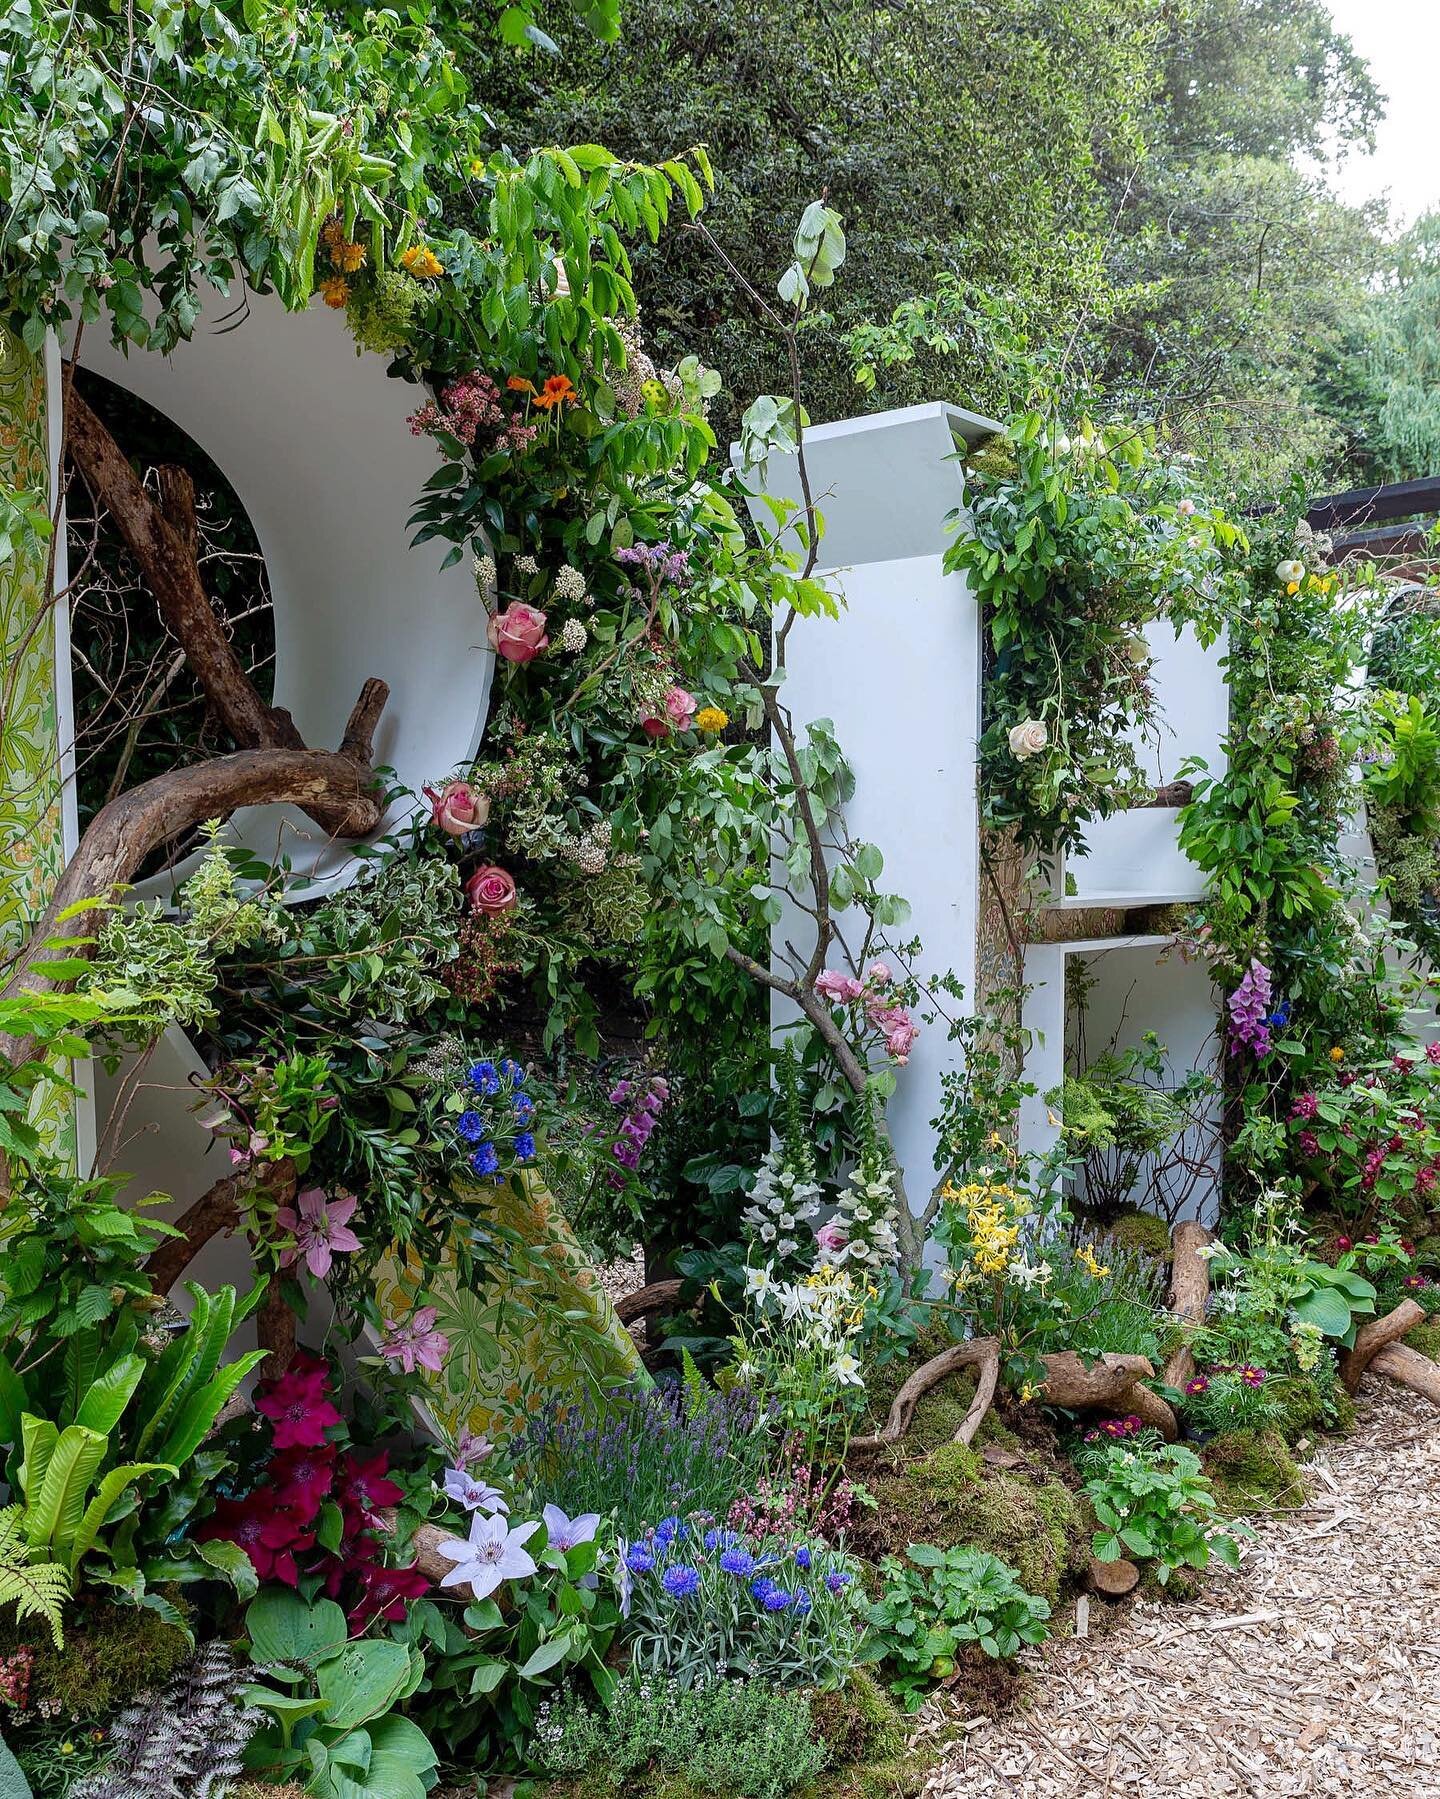 Iconic letter installation for @the_rhs Chelsea Flower Show sponsored by @wmorrisandco. A sustainable, ethically sourced, plant and cut flower design with BTS filming for the @bbc coverage 📺🌱

With 🙏🏾thanks to @o_pioneersuk @gardening_harriet @wo